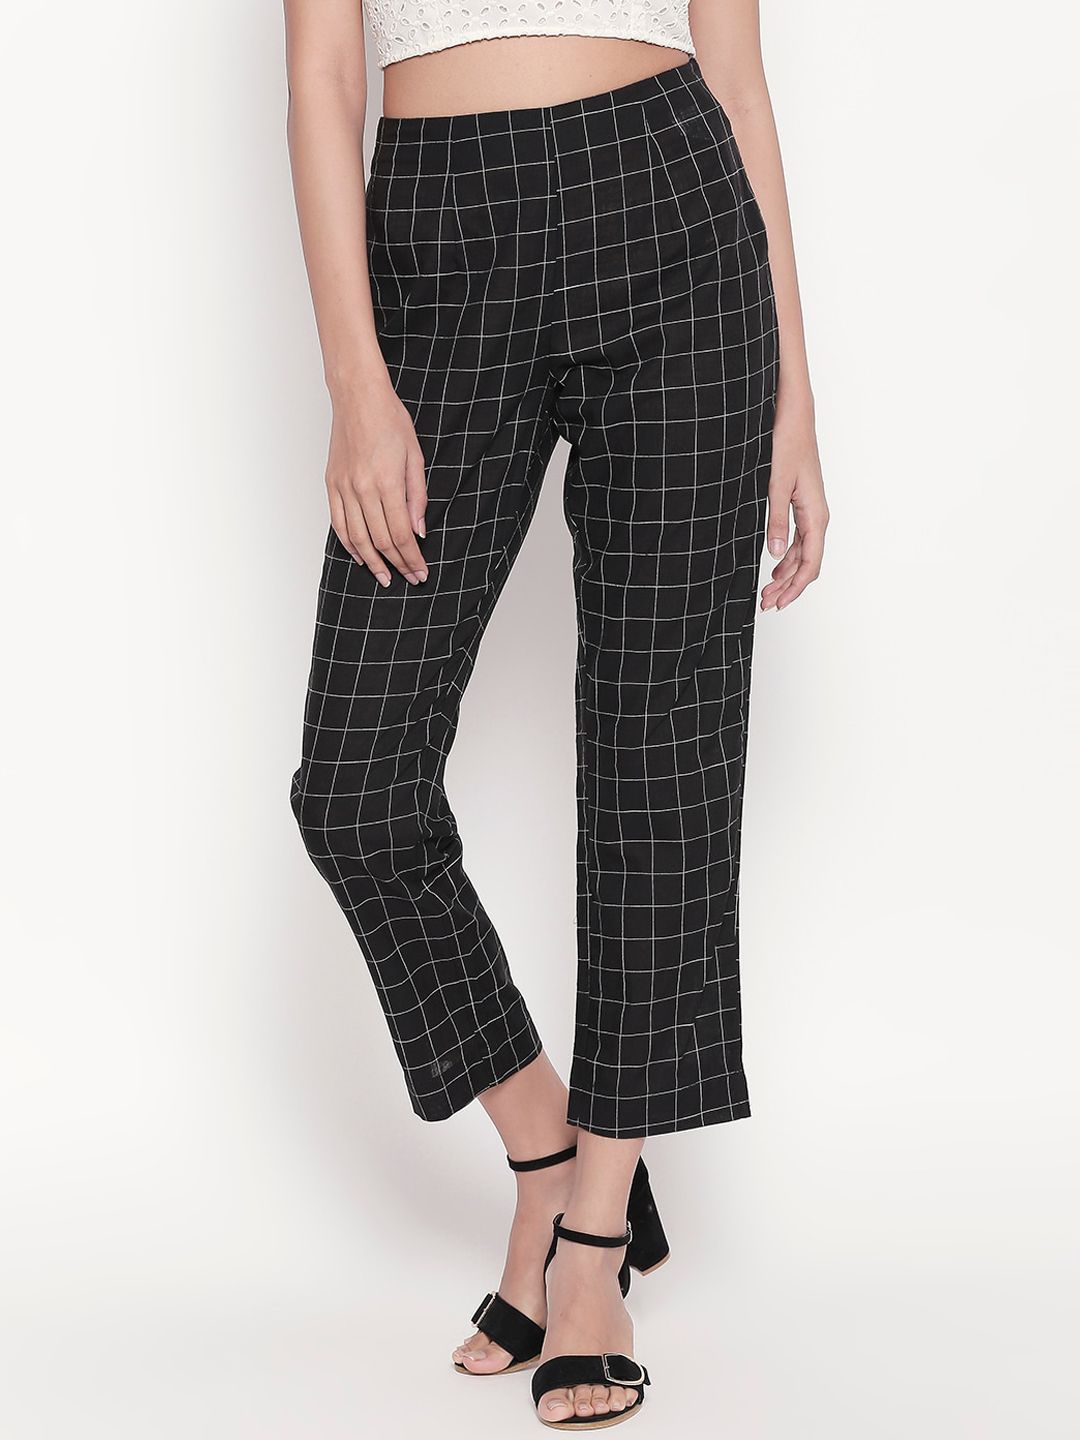 RANGMANCH BY PANTALOONS Women Black & Grey Slim Fit Checked Regular Trousers Price in India